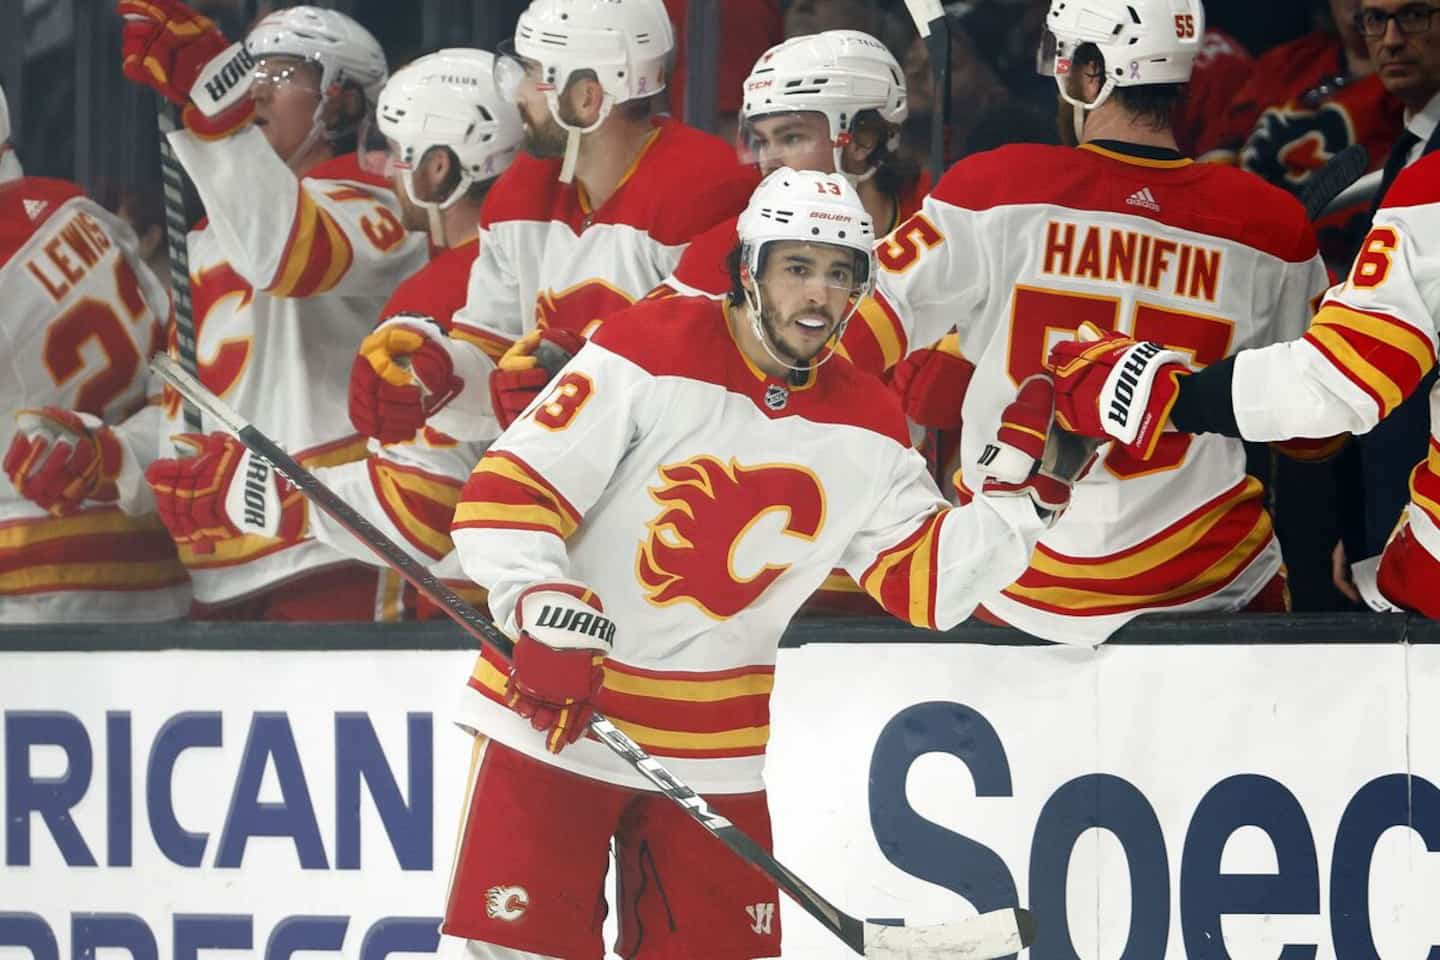 Free agents: an opportunity to seize for Johnny Gaudreau